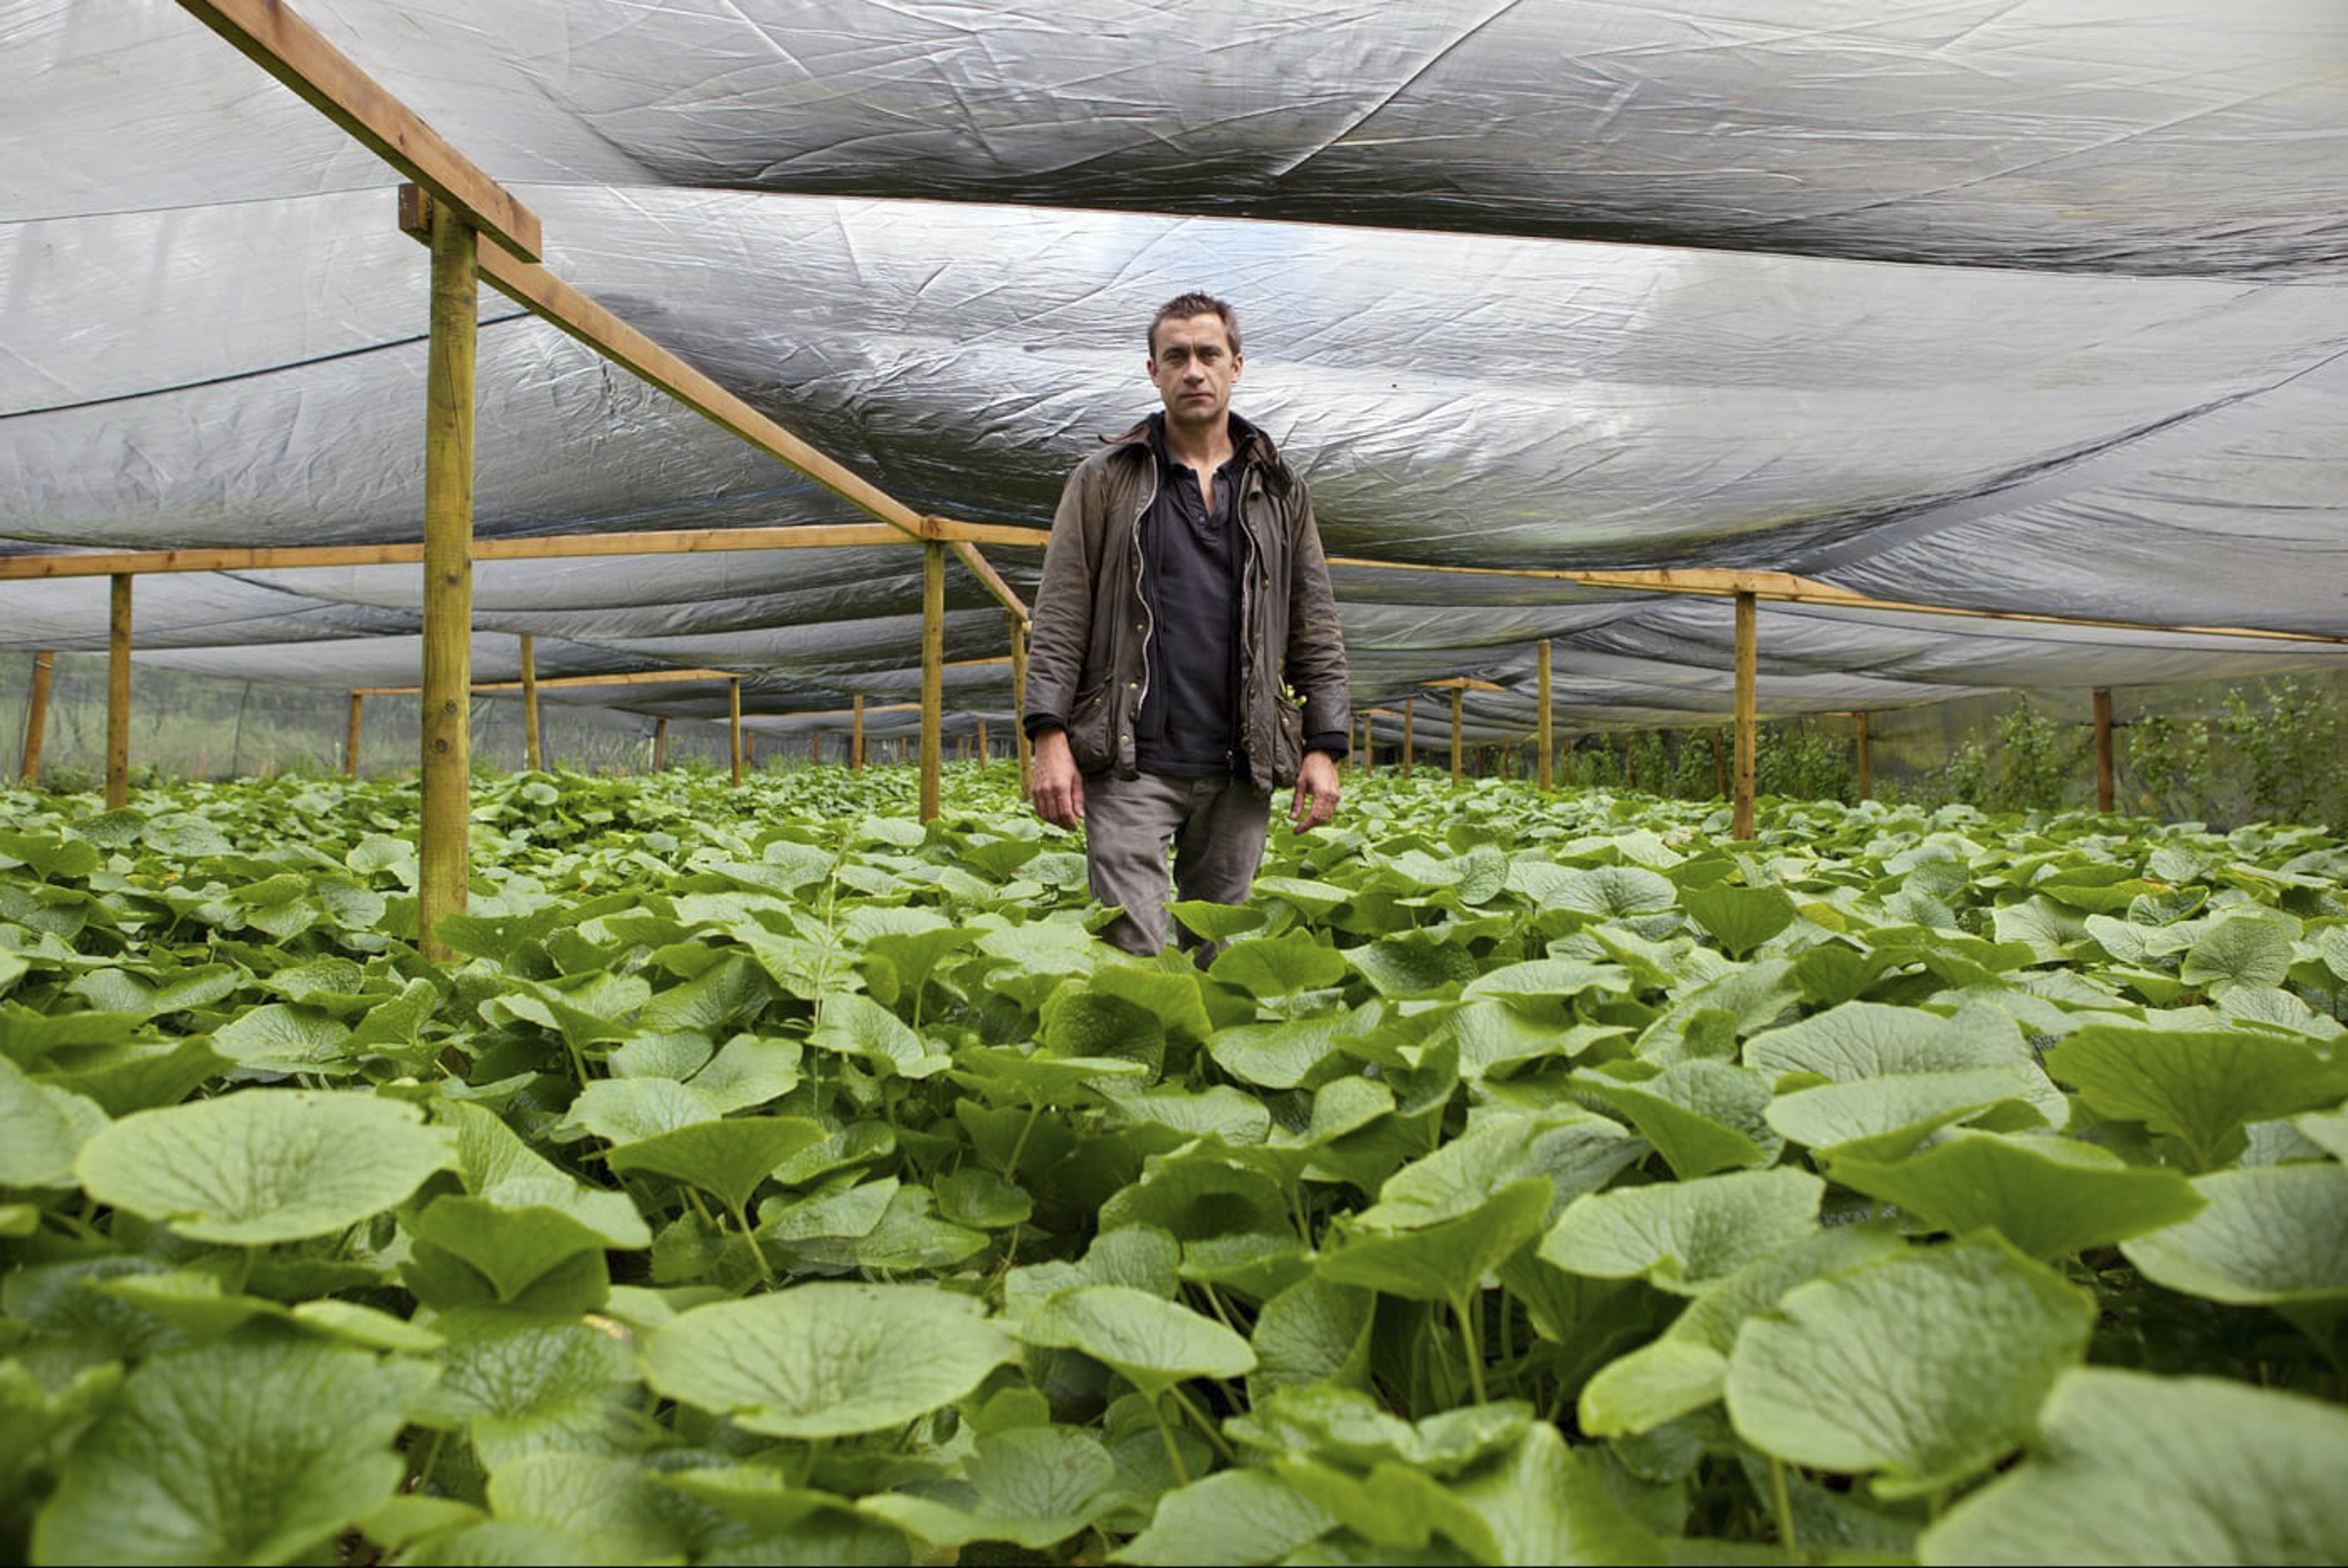 Jon Old at the The Wasabi Company’s farm near the village of Micheldever in the UK. Photo: The Wasabi Company